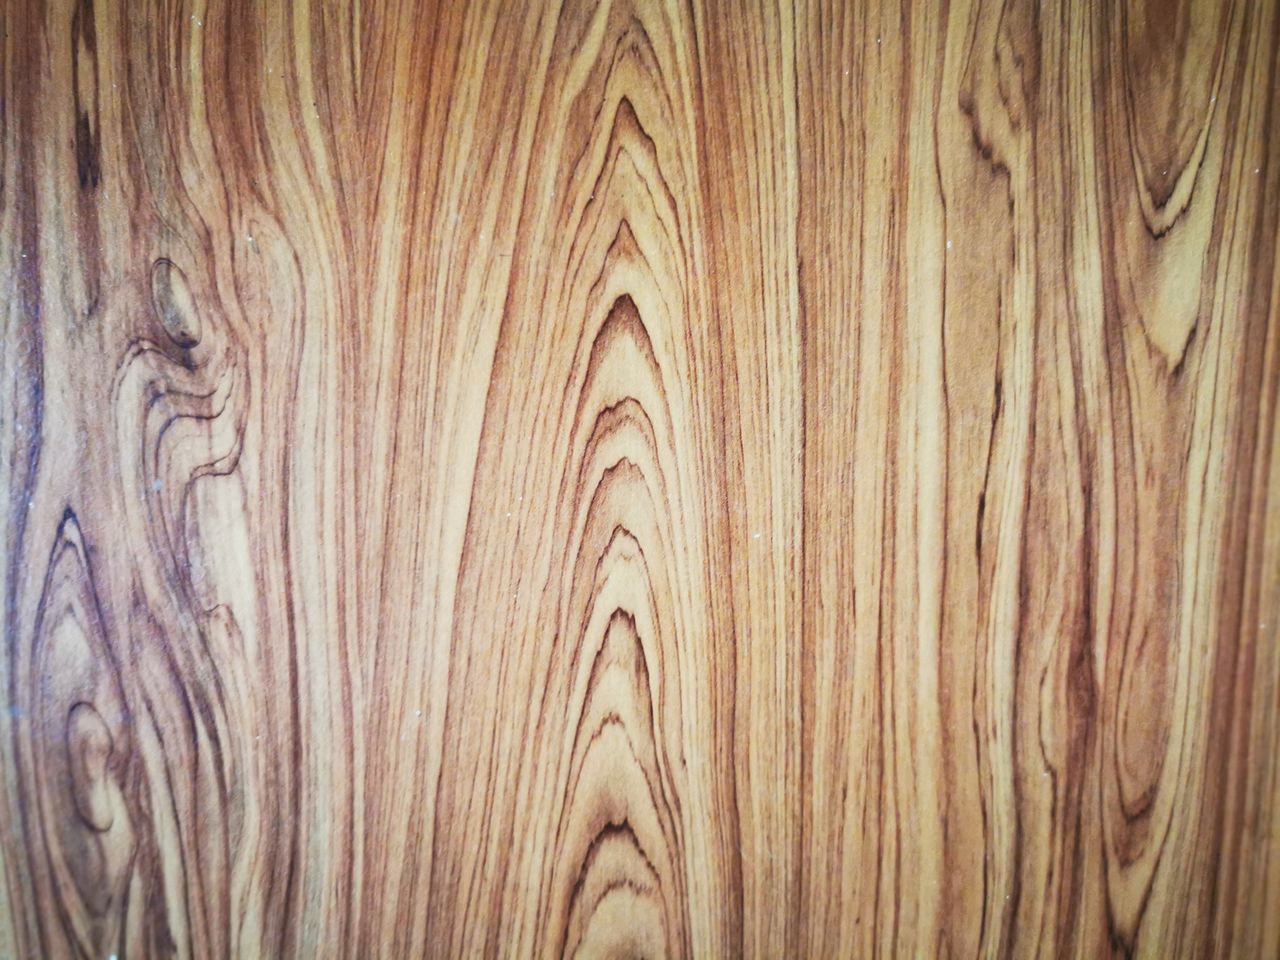 wood, backgrounds, pattern, textured, full frame, wood grain, brown, no people, close-up, floor, hardwood, flooring, plank, wood flooring, laminate flooring, knotted wood, timber, indoors, tree, rough, striped, wood paneling, abstract